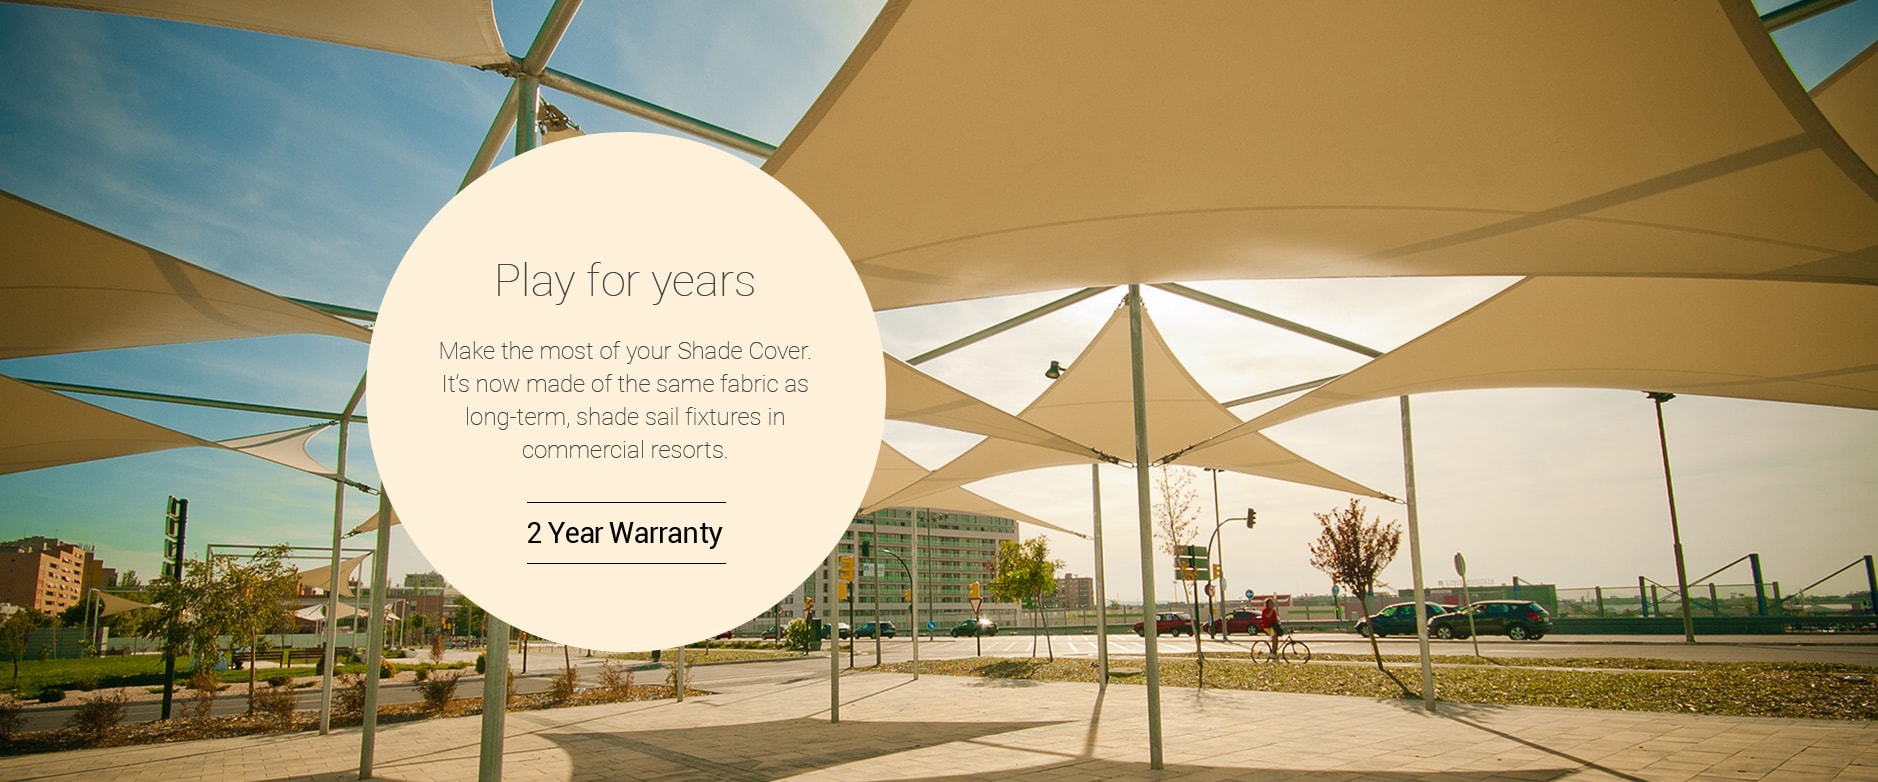 Our new Shade Covers are now made of the same fabric as long-term, shade sail fixtures in commercial resorts.